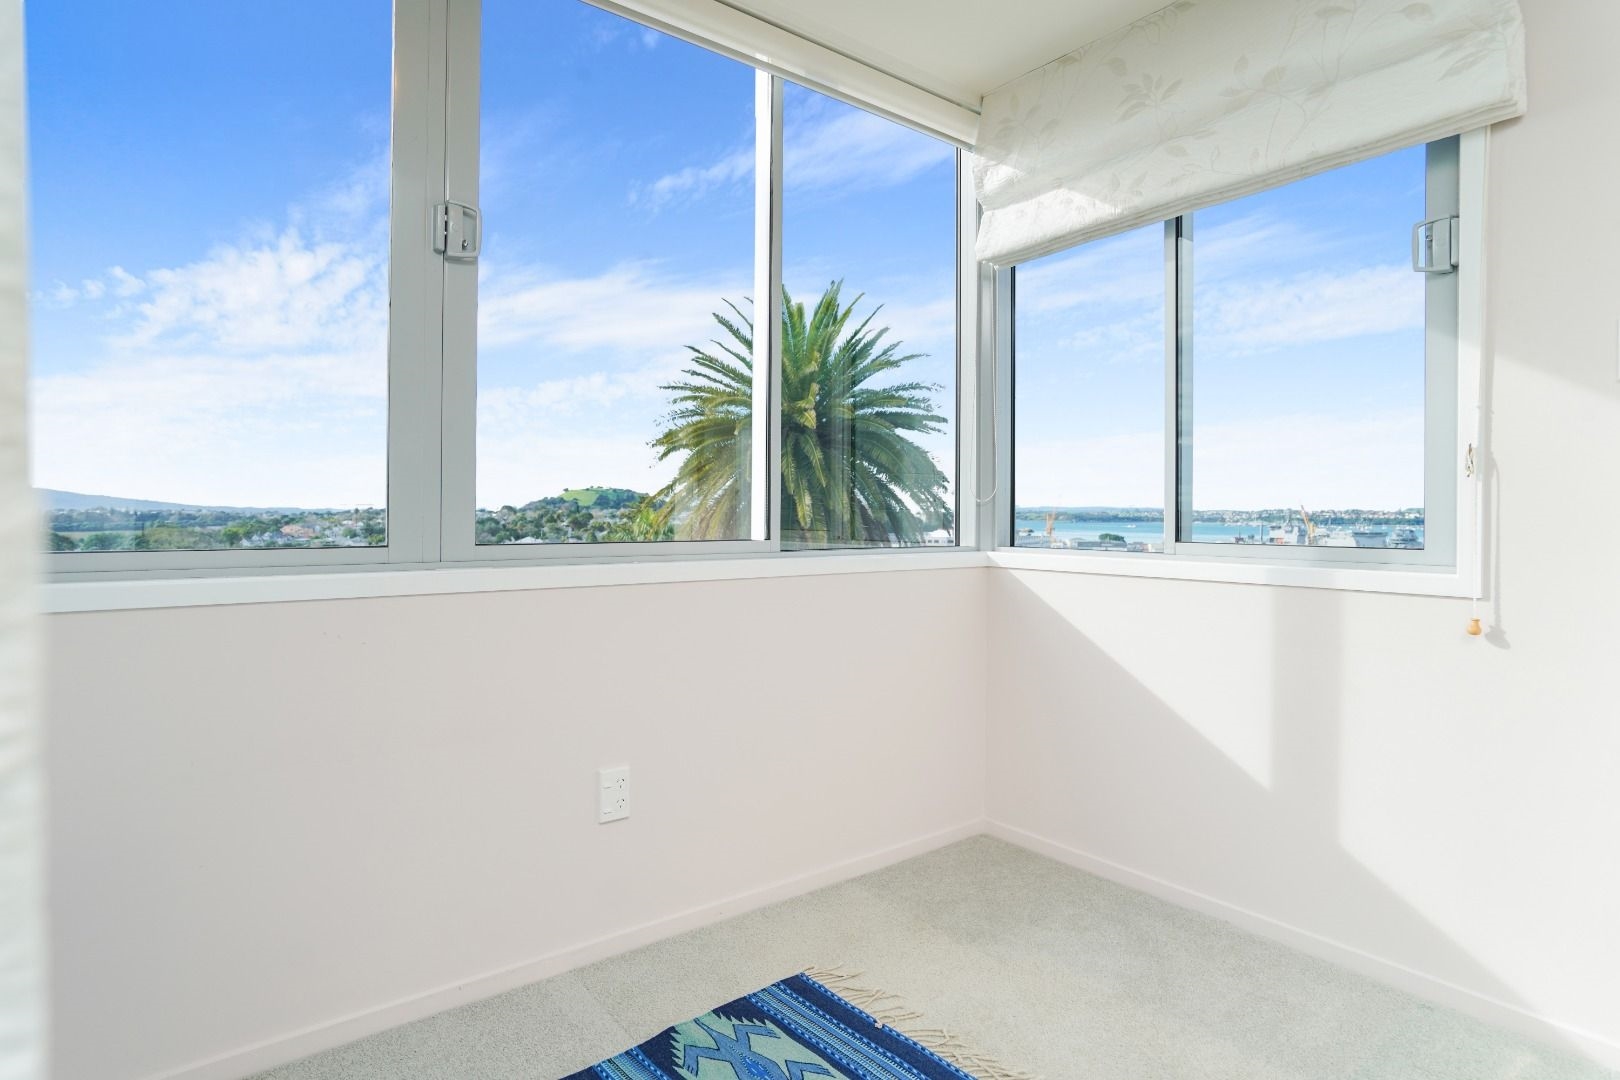 180 degree views in this unique Stanley Bay apartment image 4